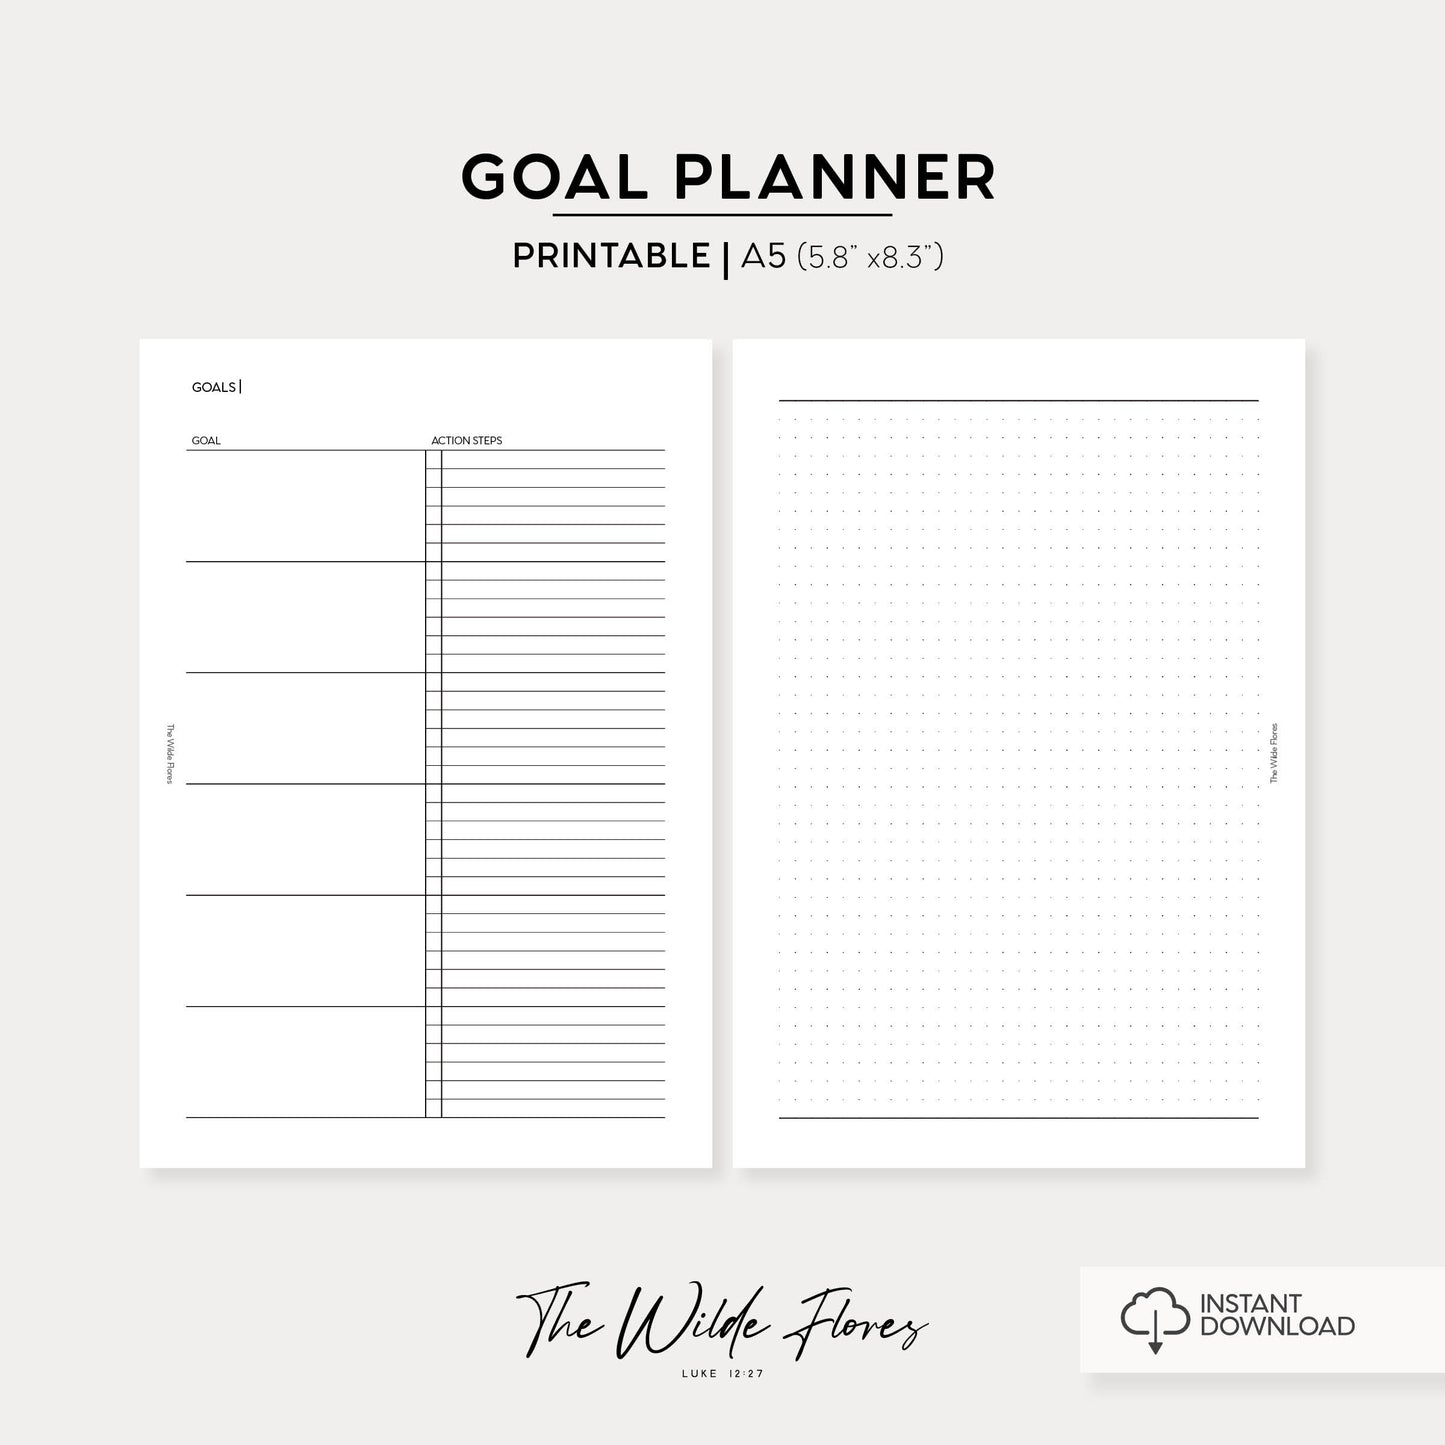 Goal Planner: A5 Size Printable